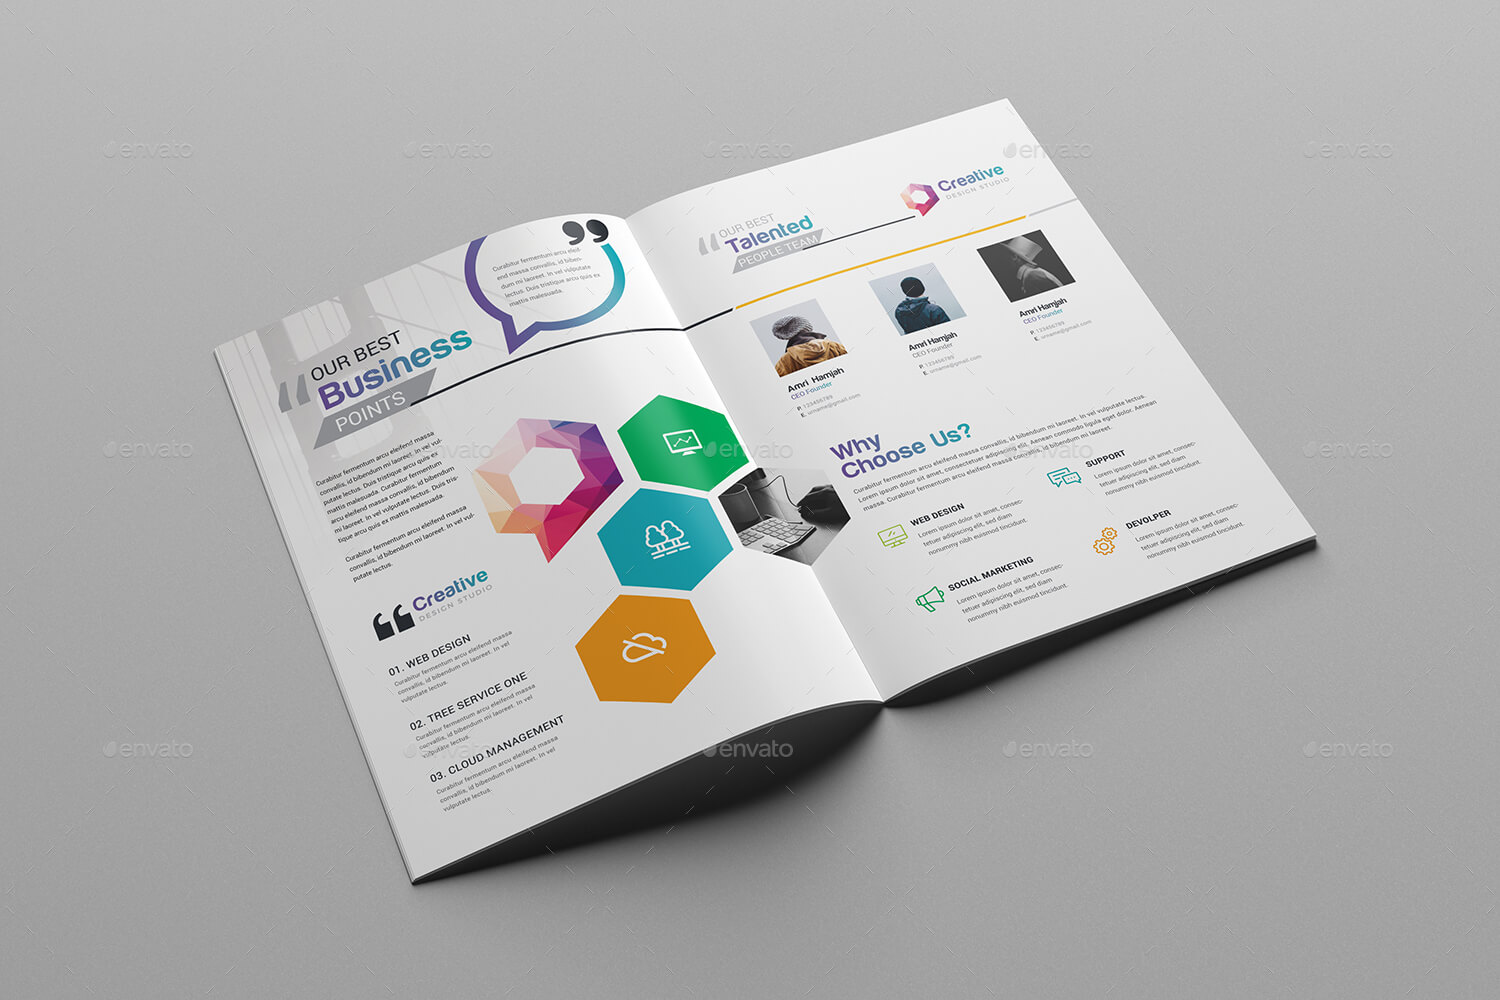 027 Fold Brochure Template Free Download Psd 02 Bifold Image Regarding 2 Fold Brochure Template Free